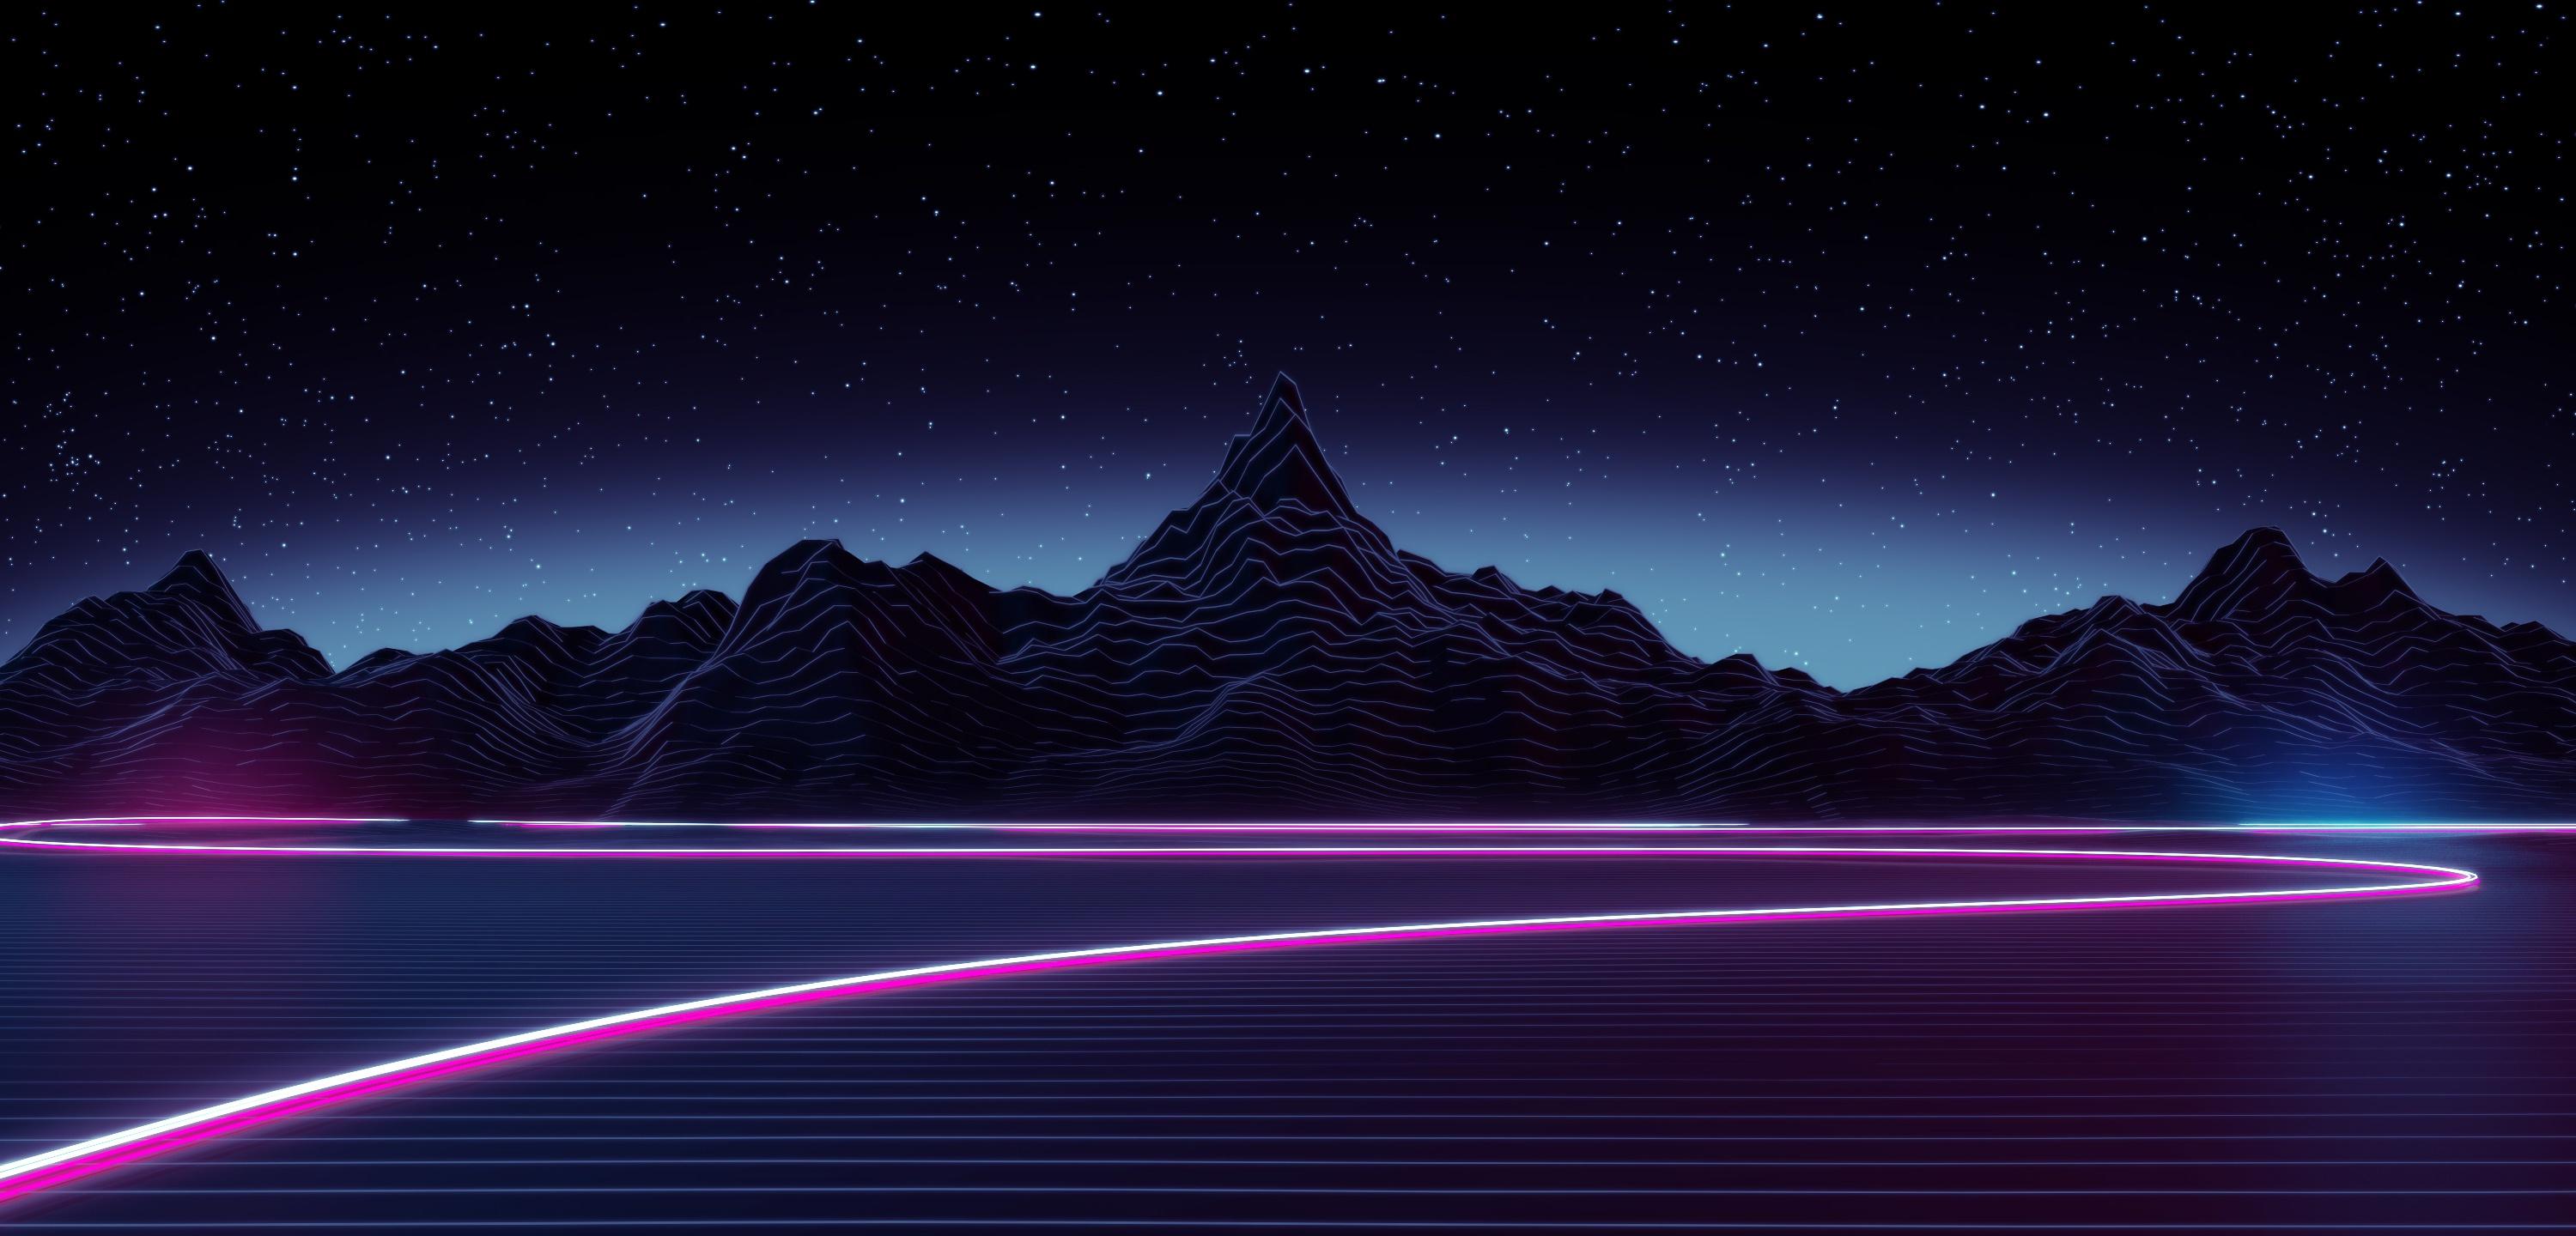 Graphics, Neon, Sky, Mountains, Space, Stars, Night, Music, Synthpop